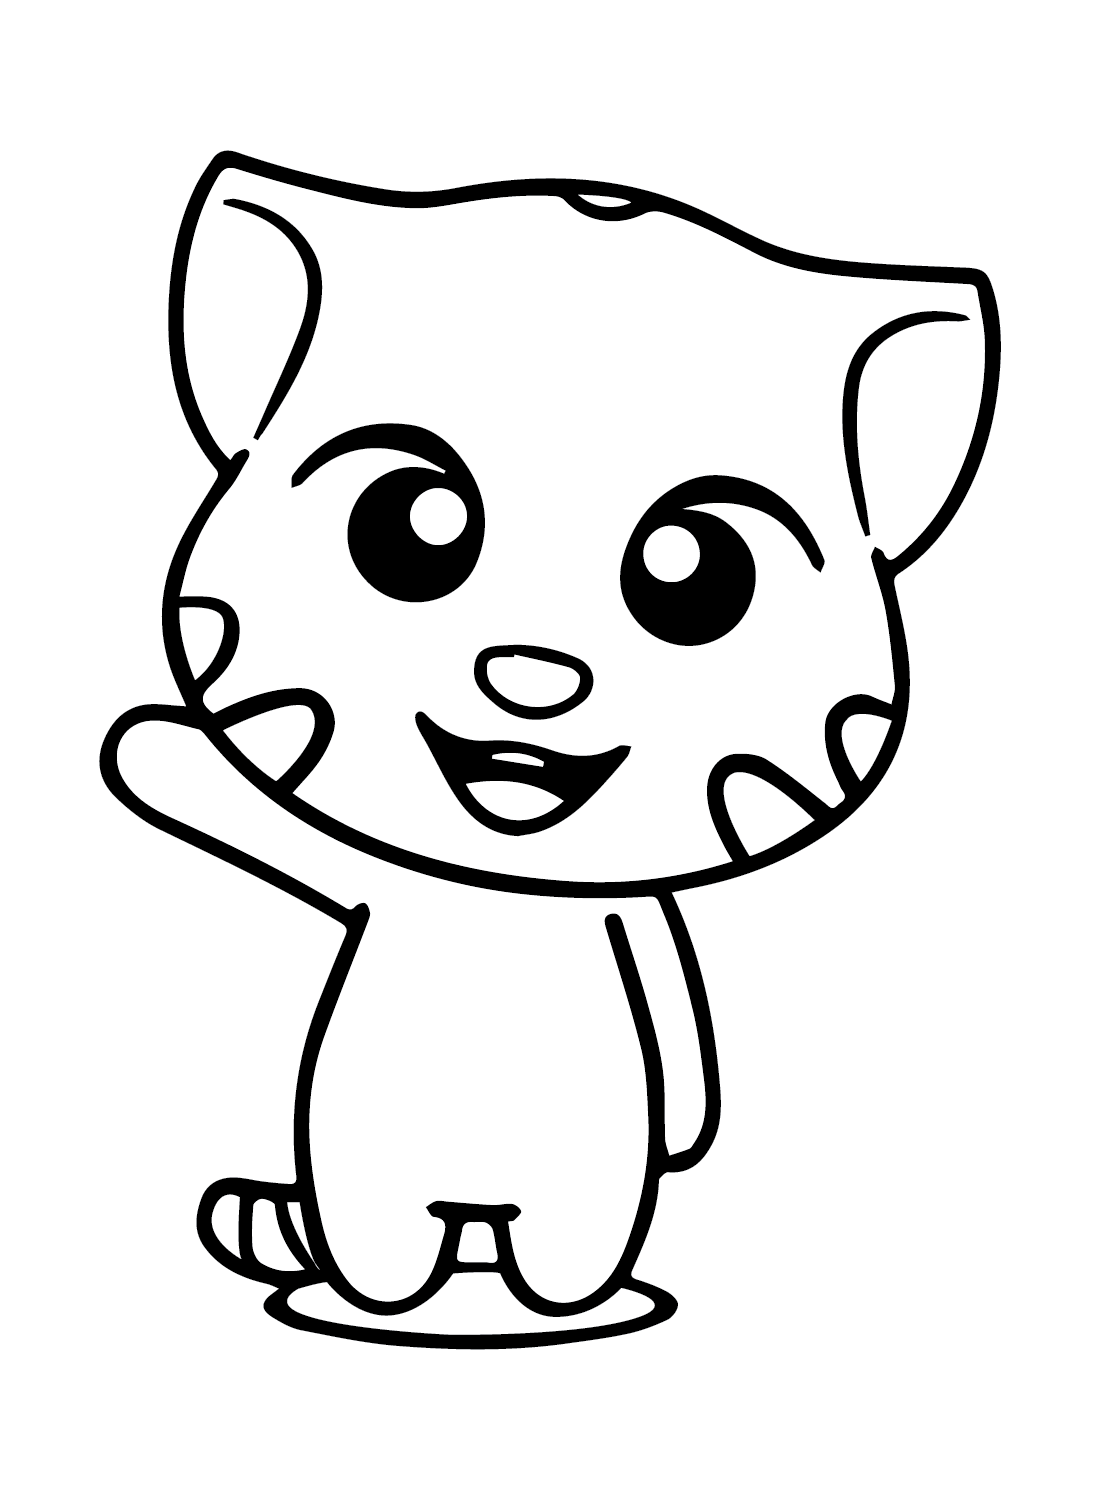 Talking tom coloring pages printable for free download